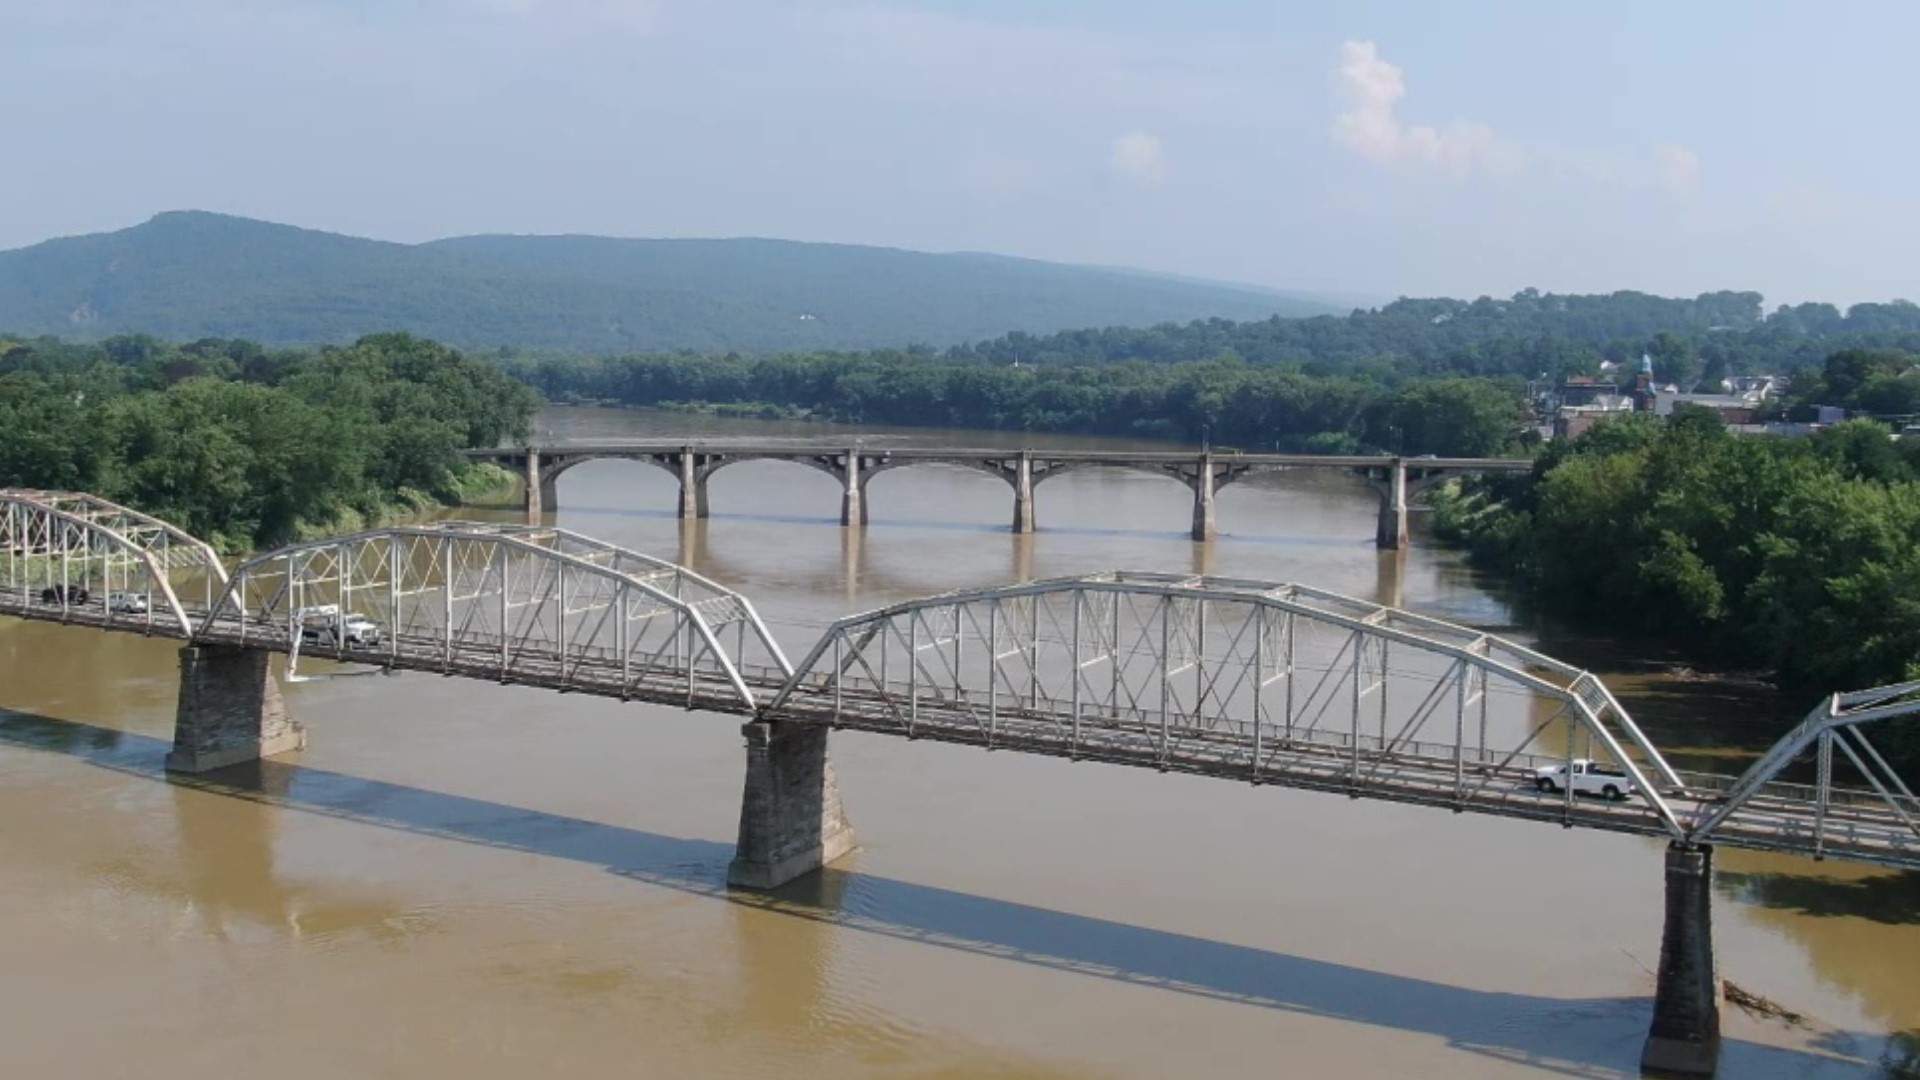 Newswatch 16's Chelsea Strub examines the renderings for the new bridges connecting Pittston and West Pittston.